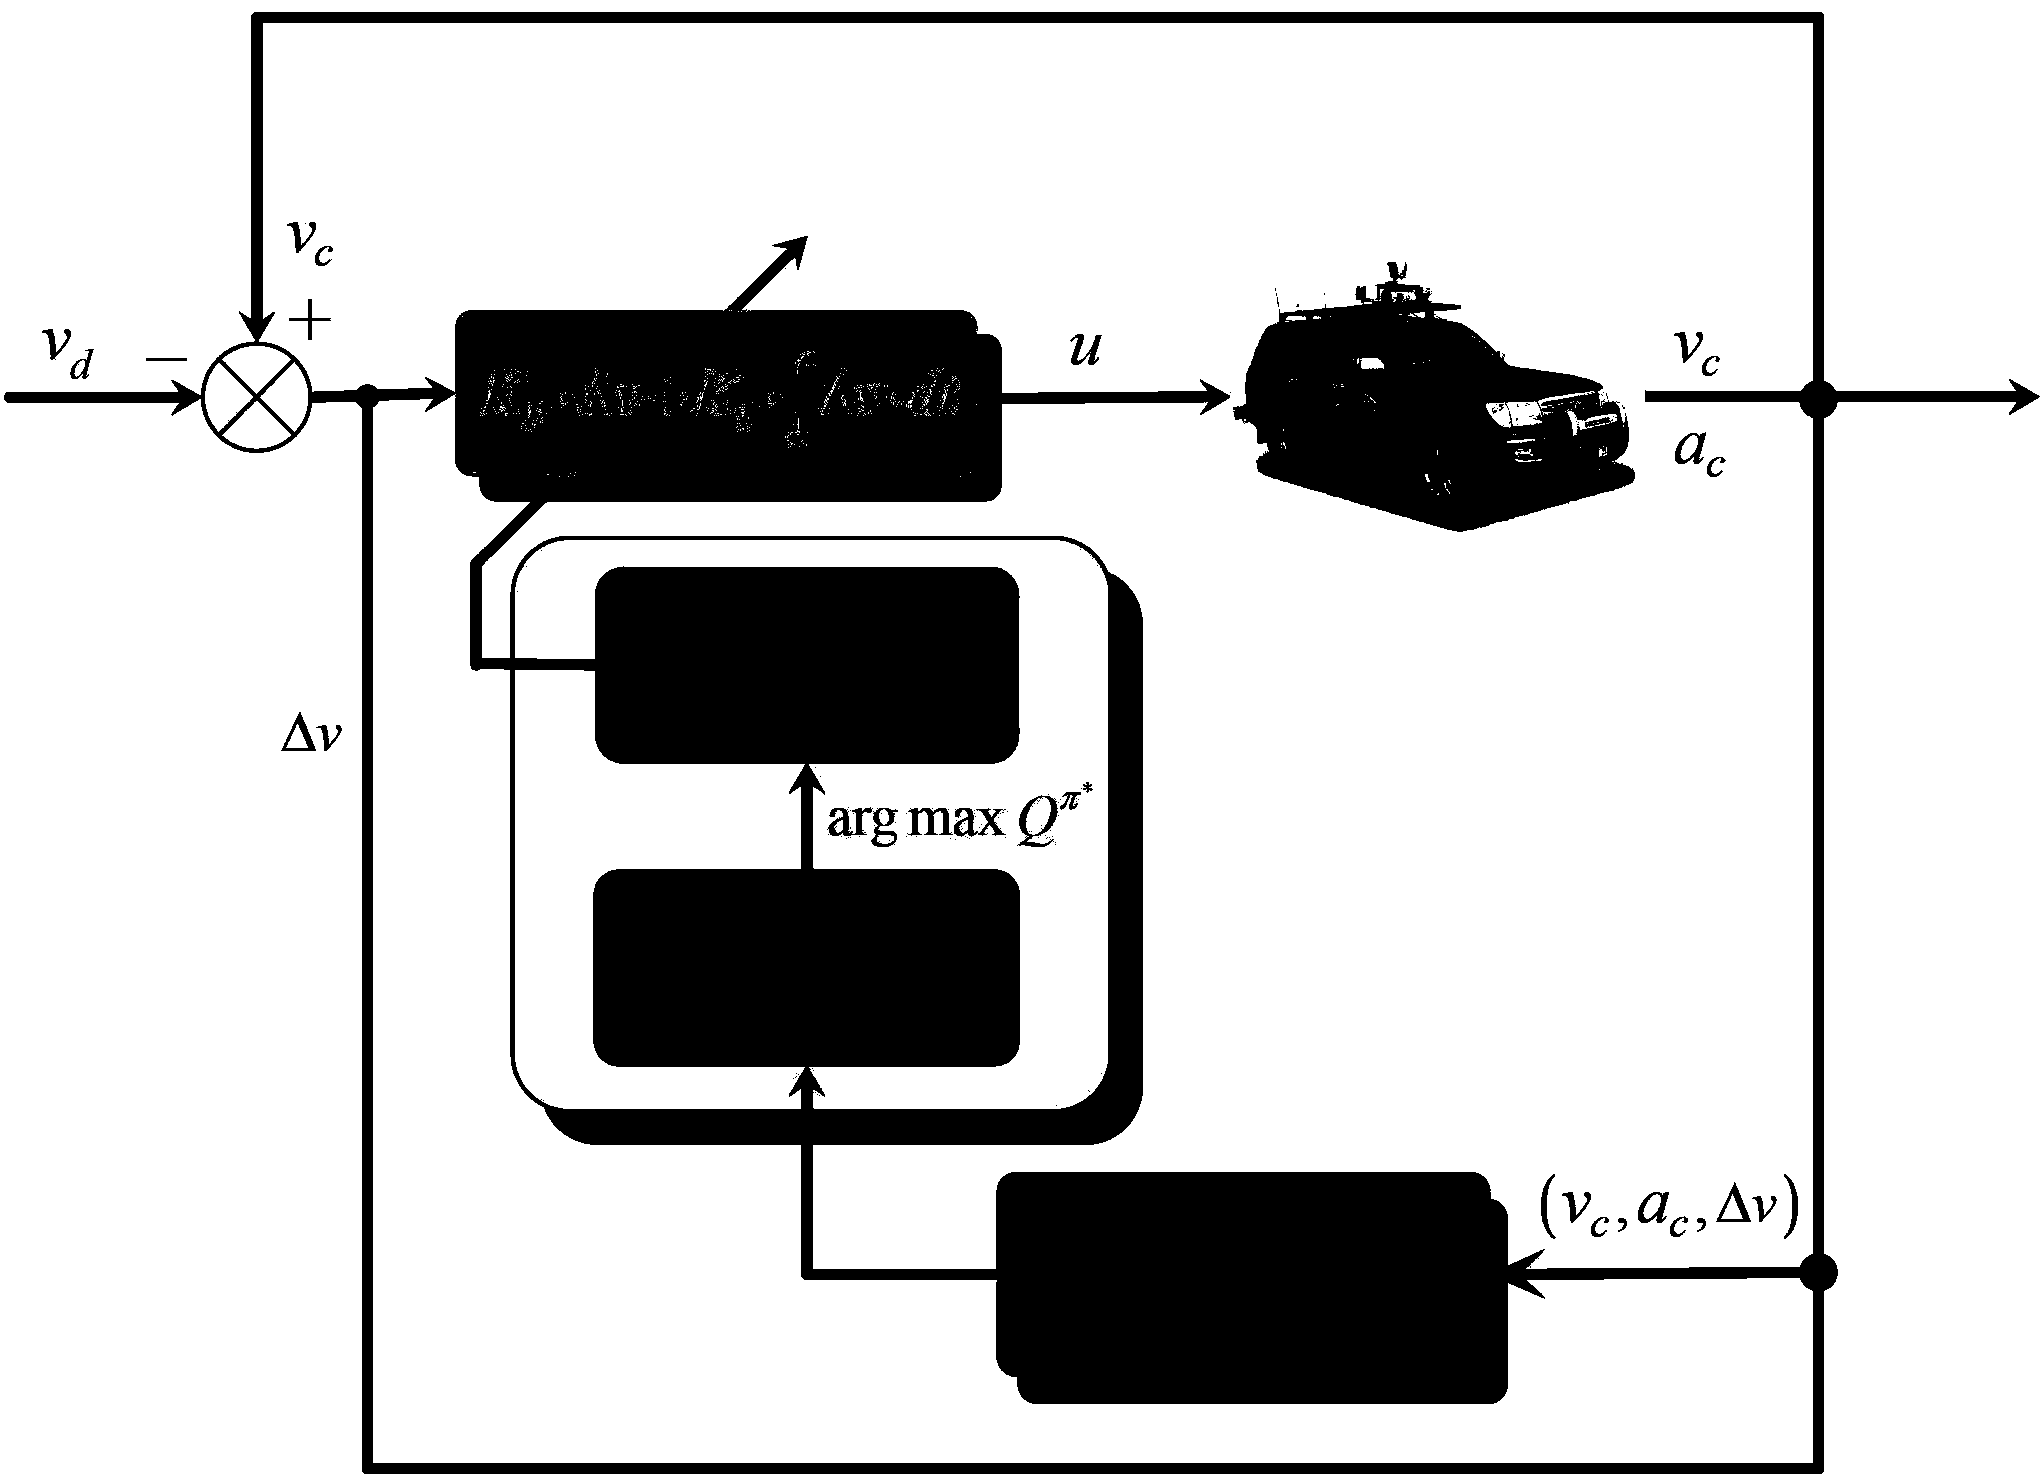 Adaptive cruise control method based on approximate policy iteration